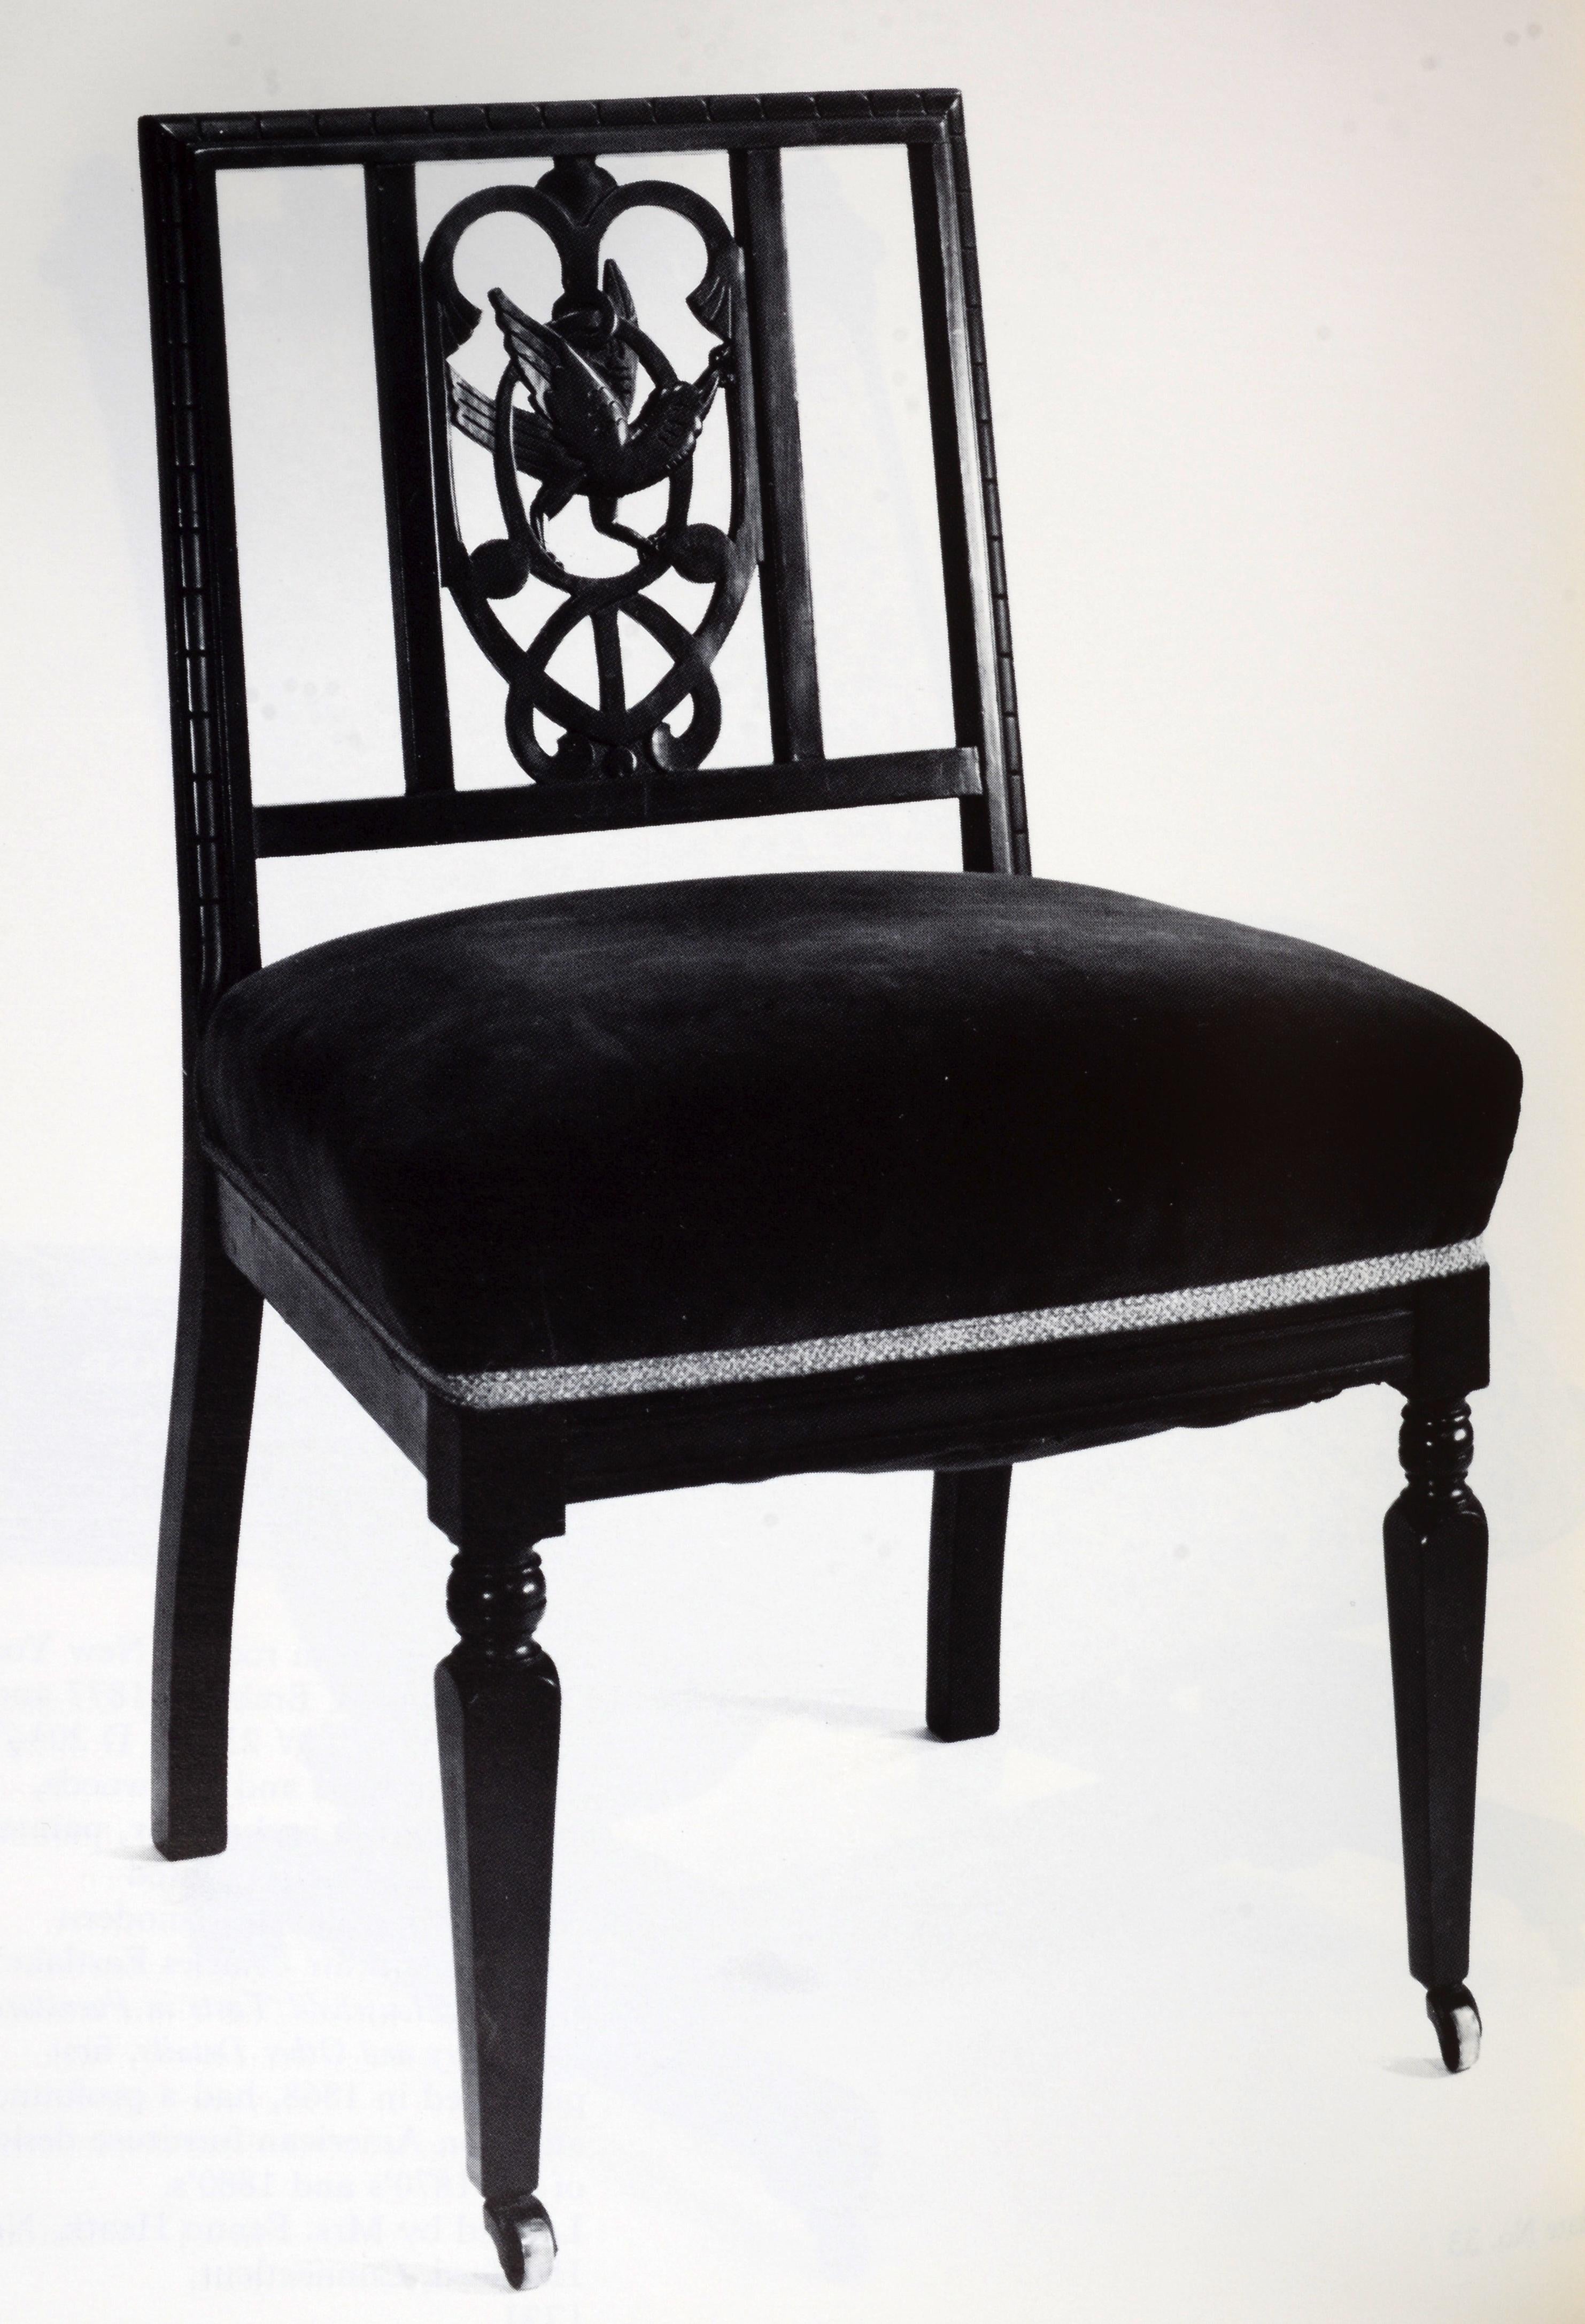 Selection of 19th c American Chairs, Exhib. Catalog Signed by the Author, 1st Ed For Sale 9